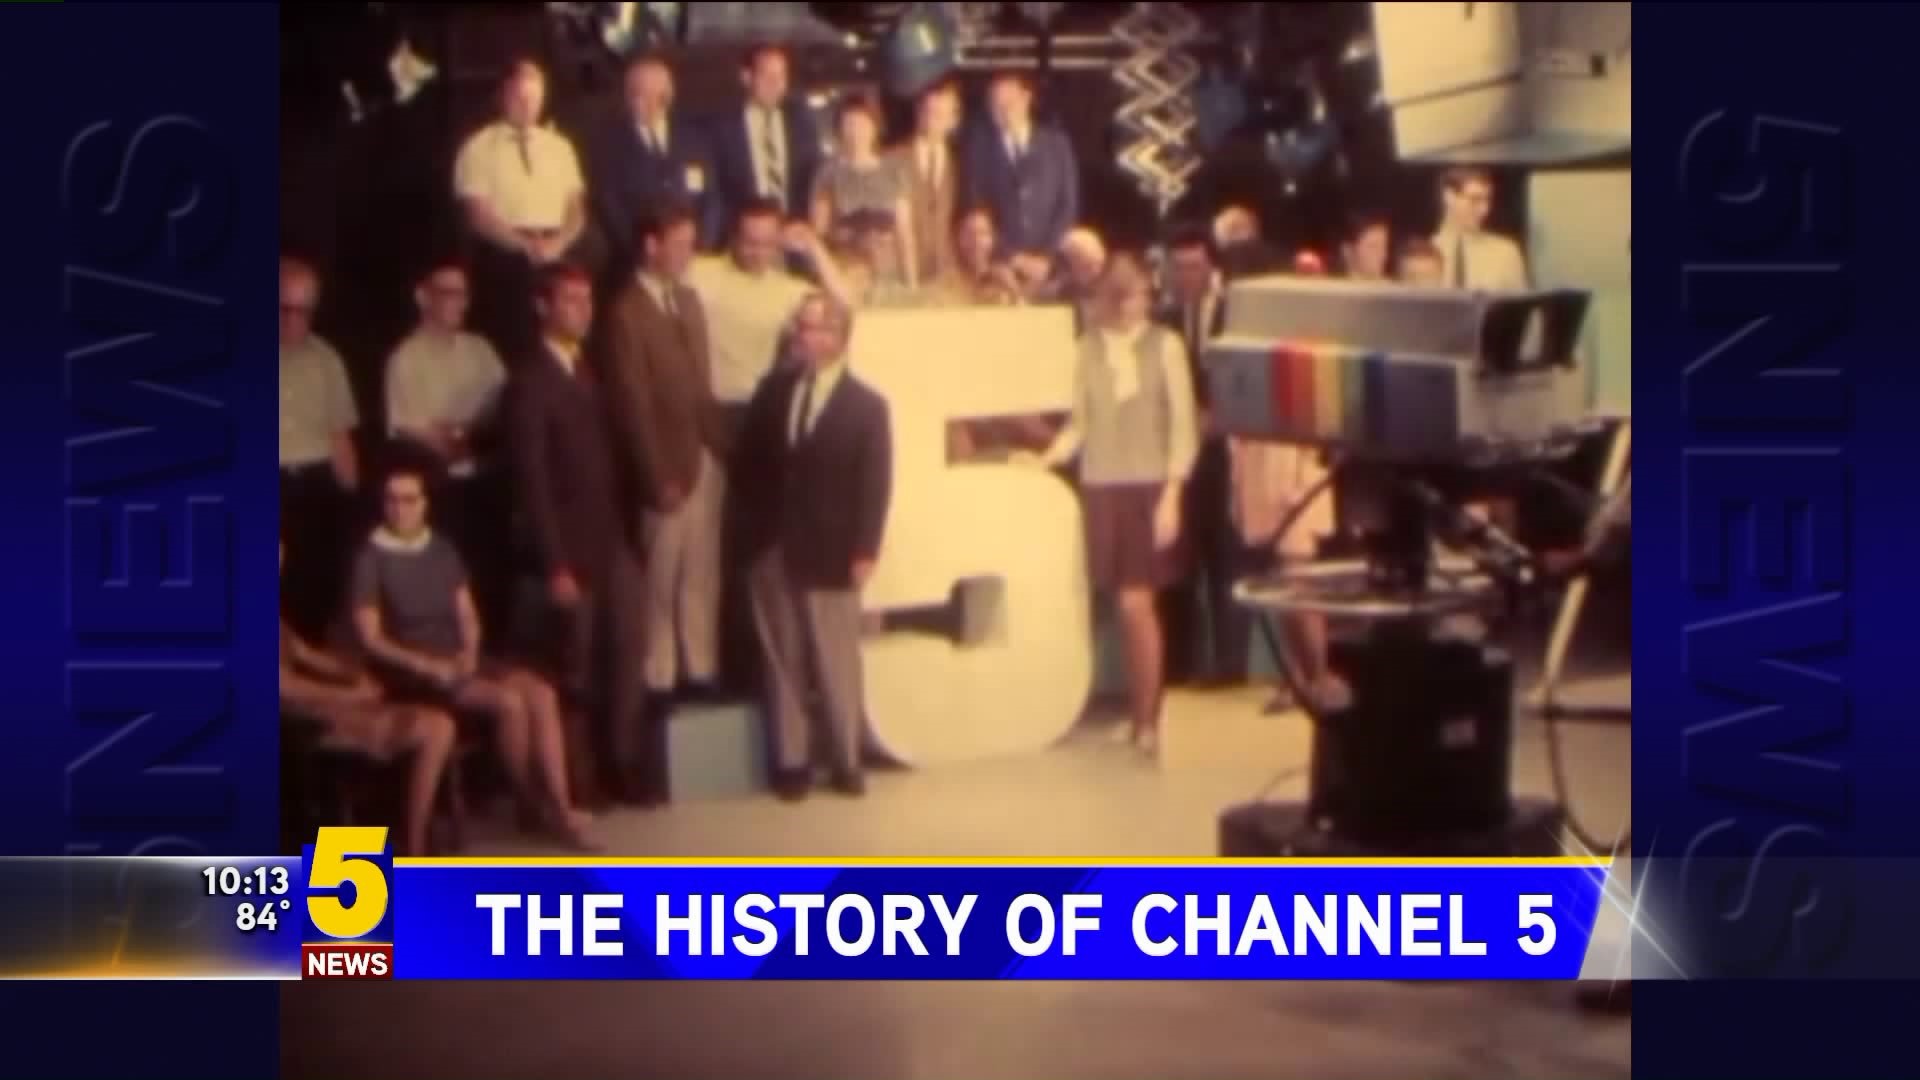 The History of Channel 5.